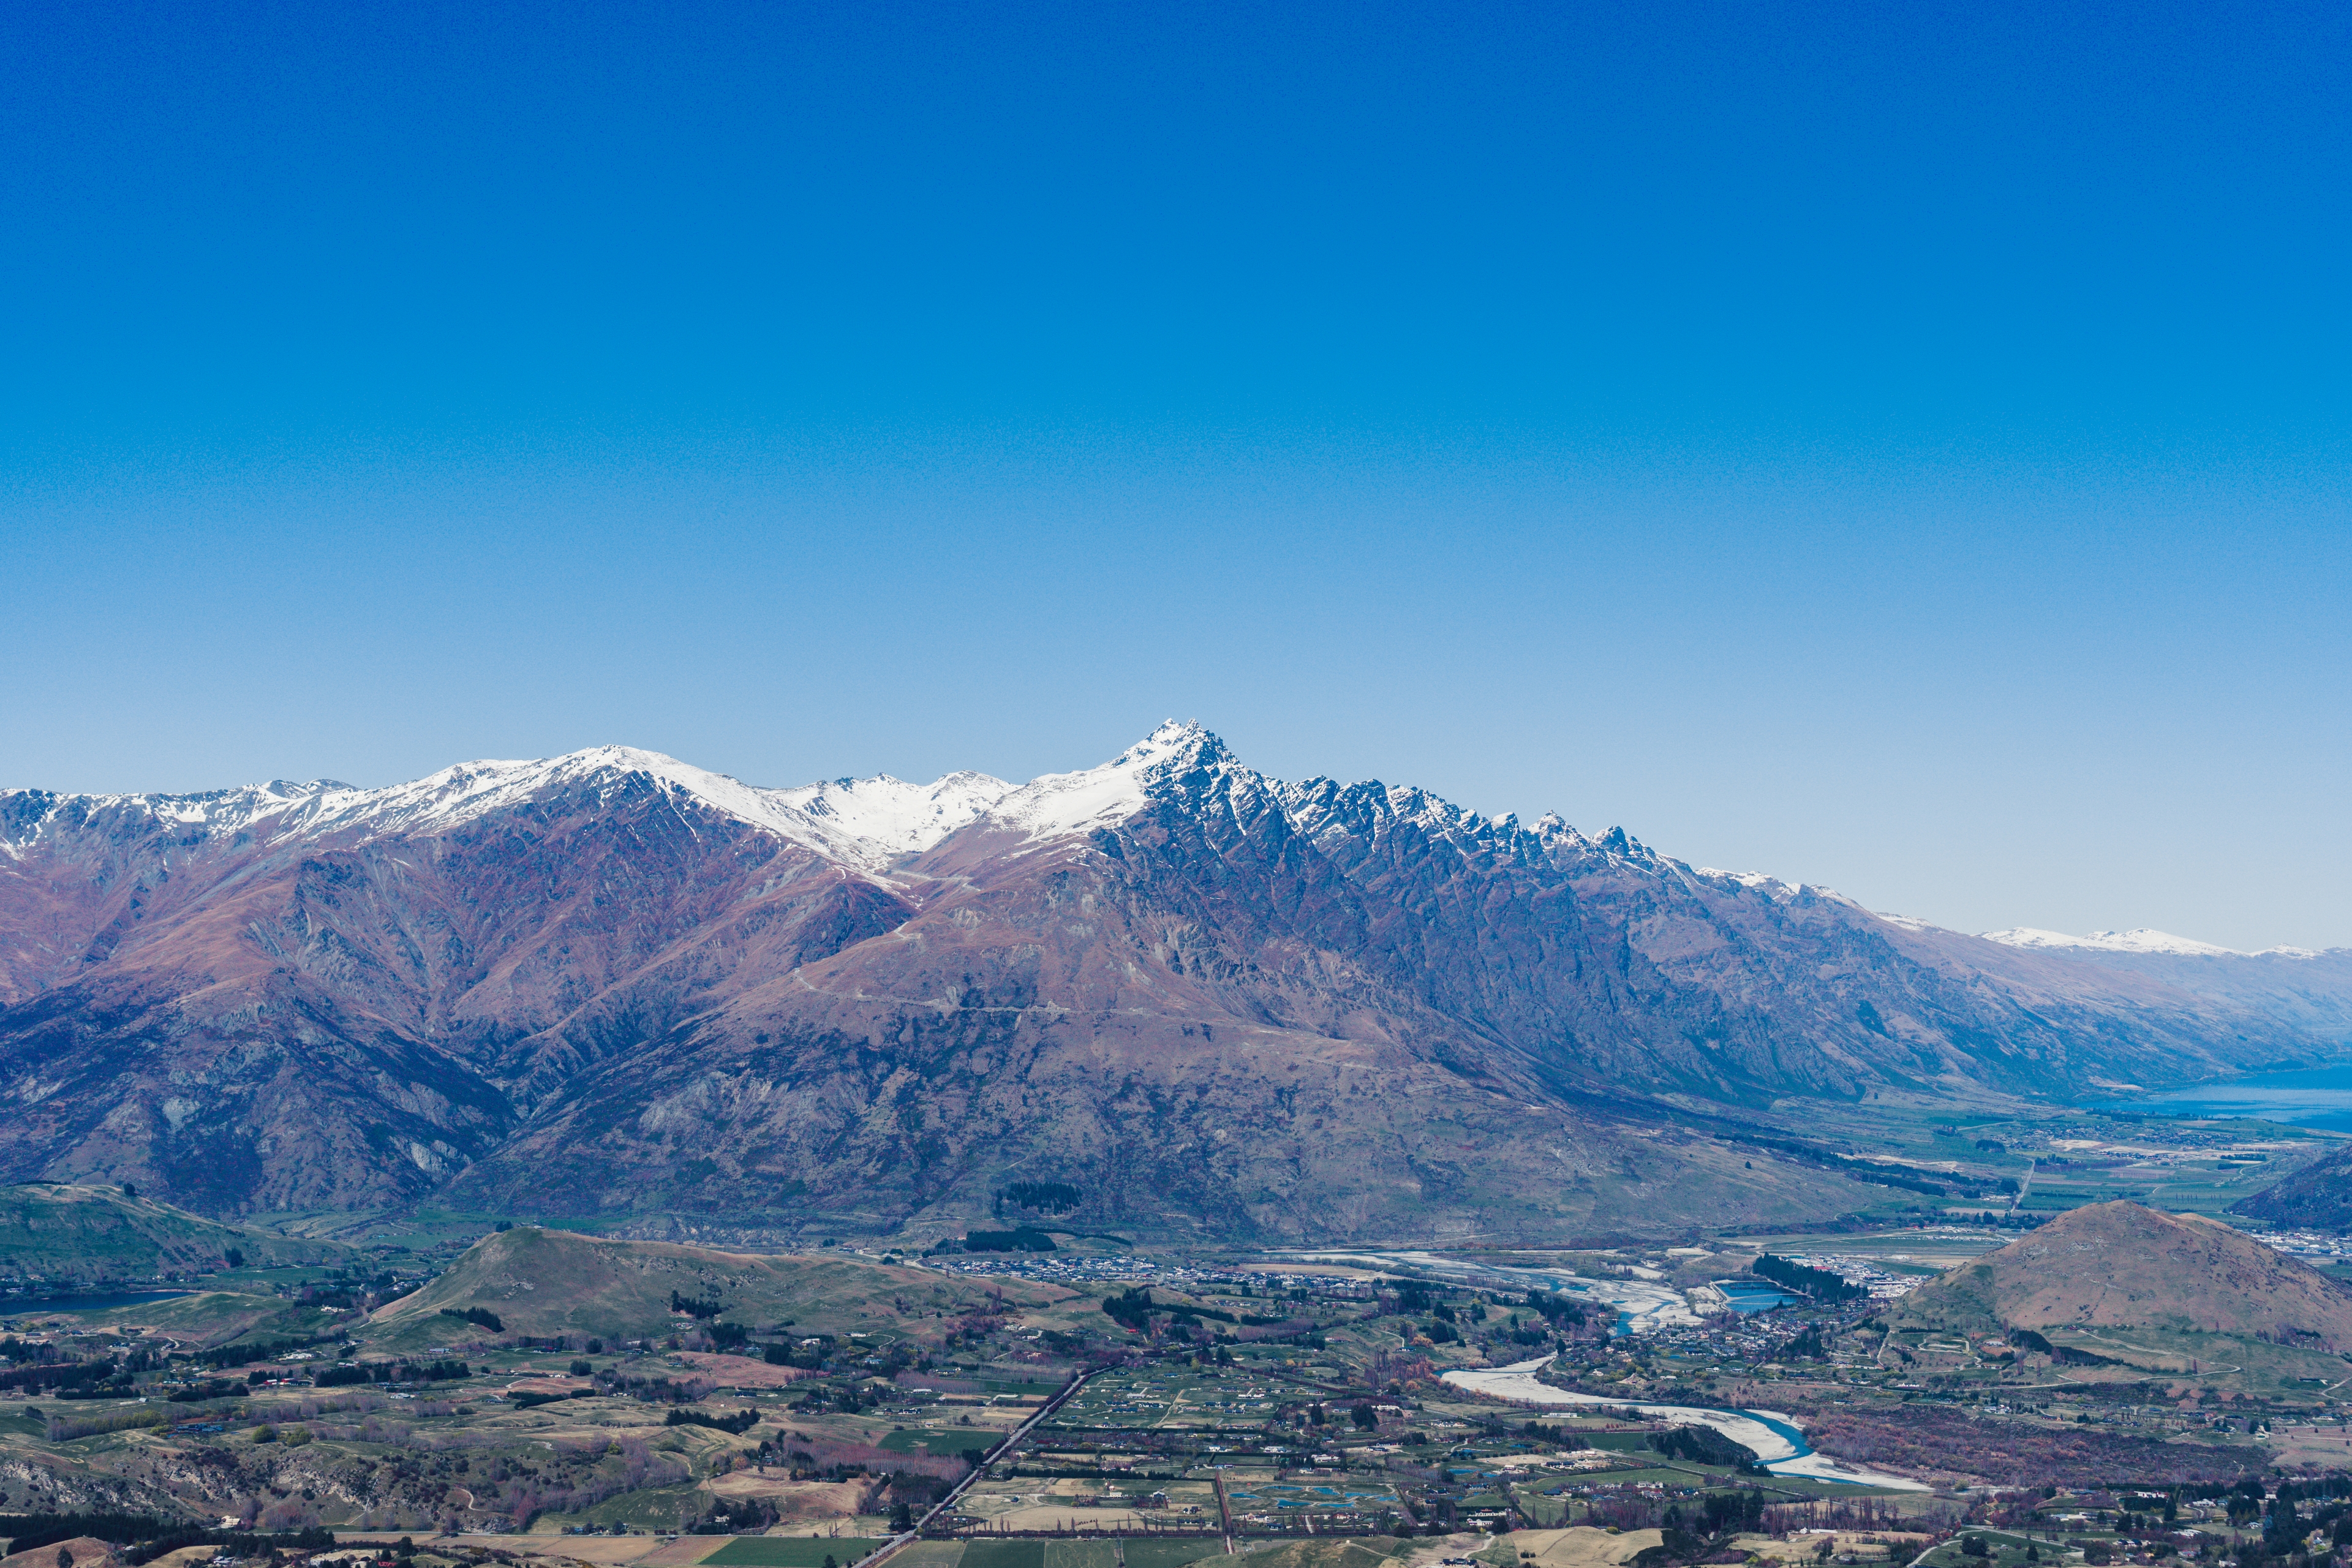 General 3840x2560 spring New Zealand snow mountains Queenstown